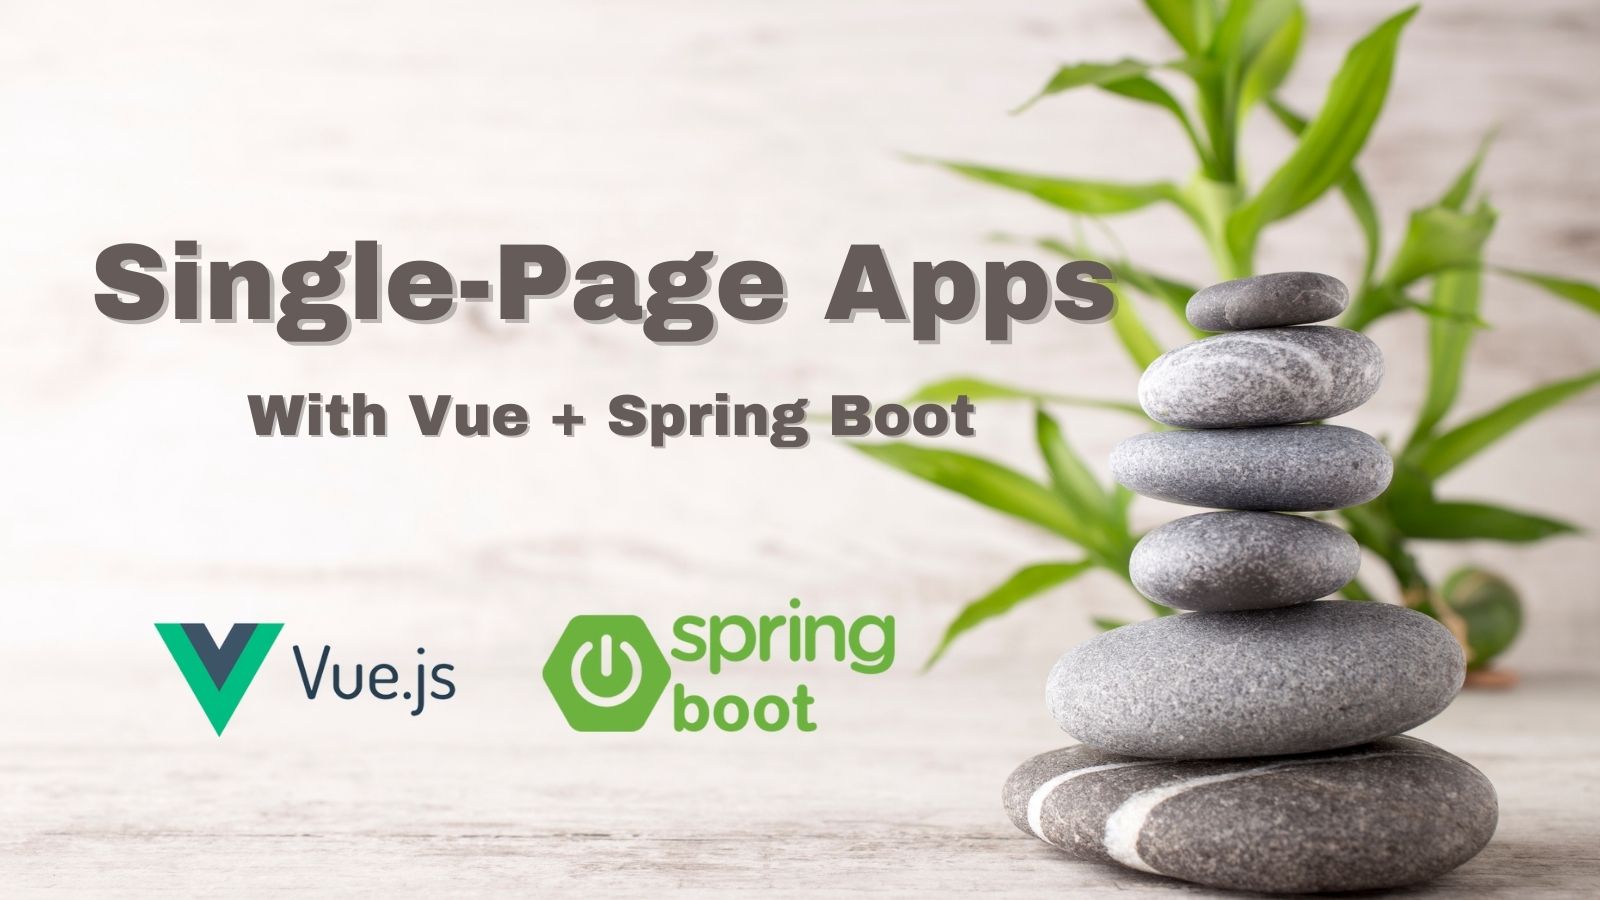 Learn How to Build a Single-Page App with Vue and Spring Boot